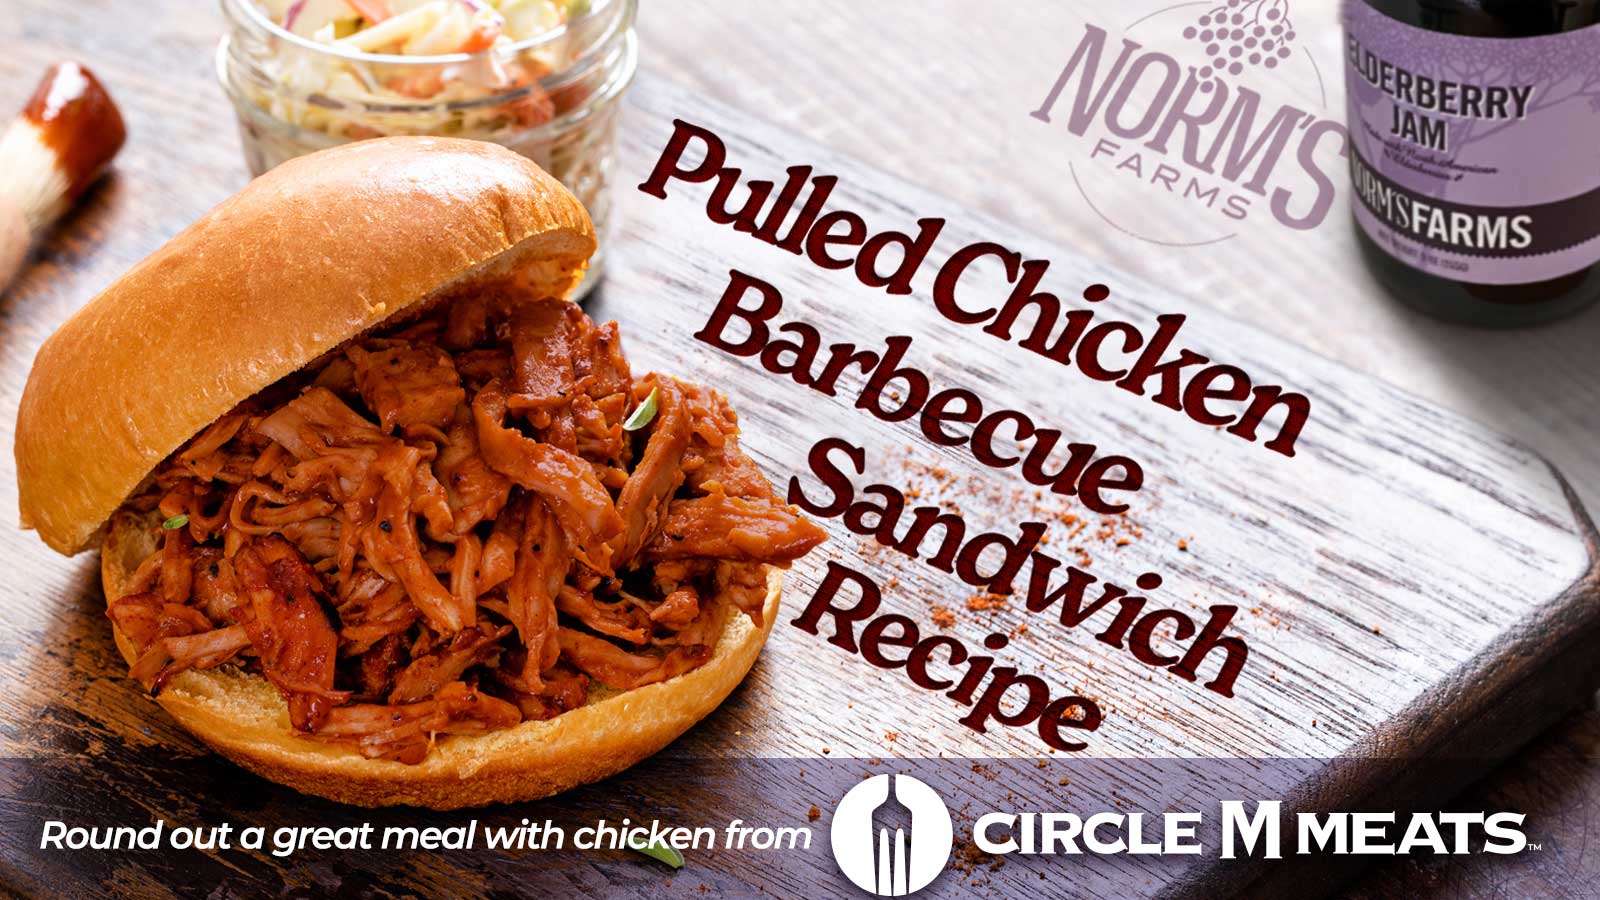 Tangy Pulled Chicken Barbecue Sandwich Recipe